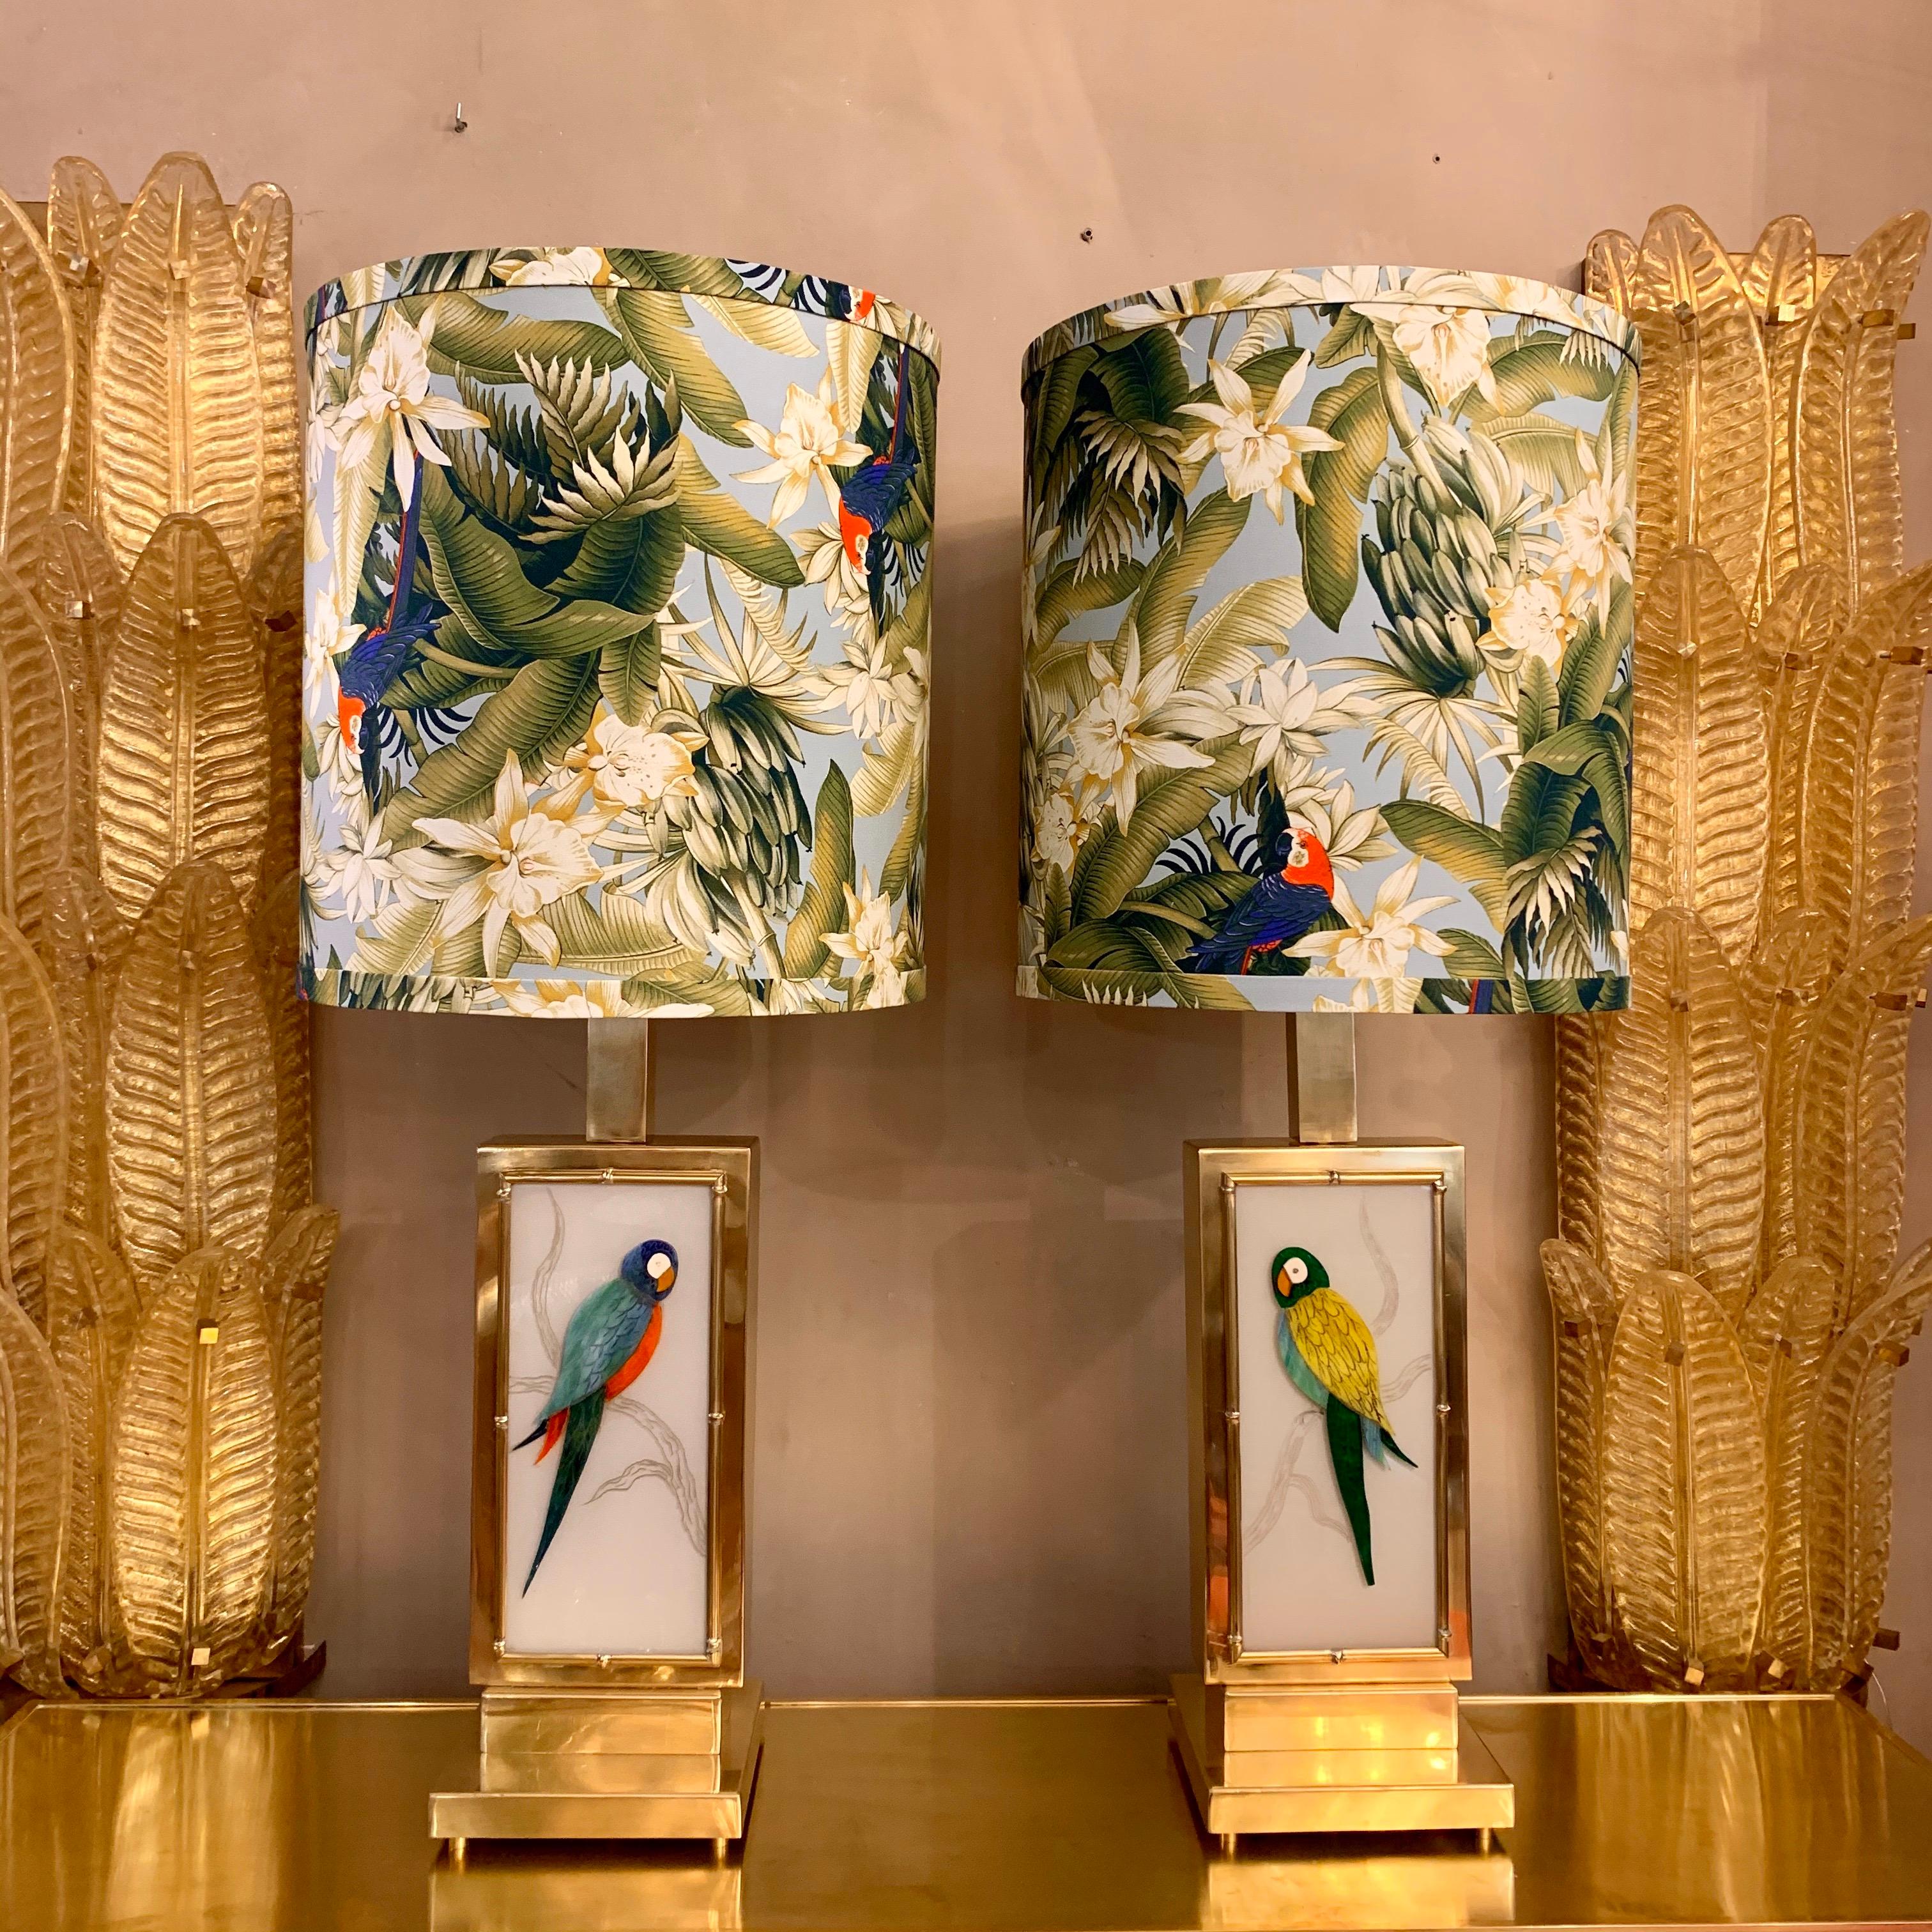 Pair of Murano two-sided glass parrots table lamps, brass structure with bamboo effect.
Each lamp has two-sided glass parrots cut by hand with different Murano glass colors.
We have realized handcrafted lampshades with Pierre Frey cotton fabric.